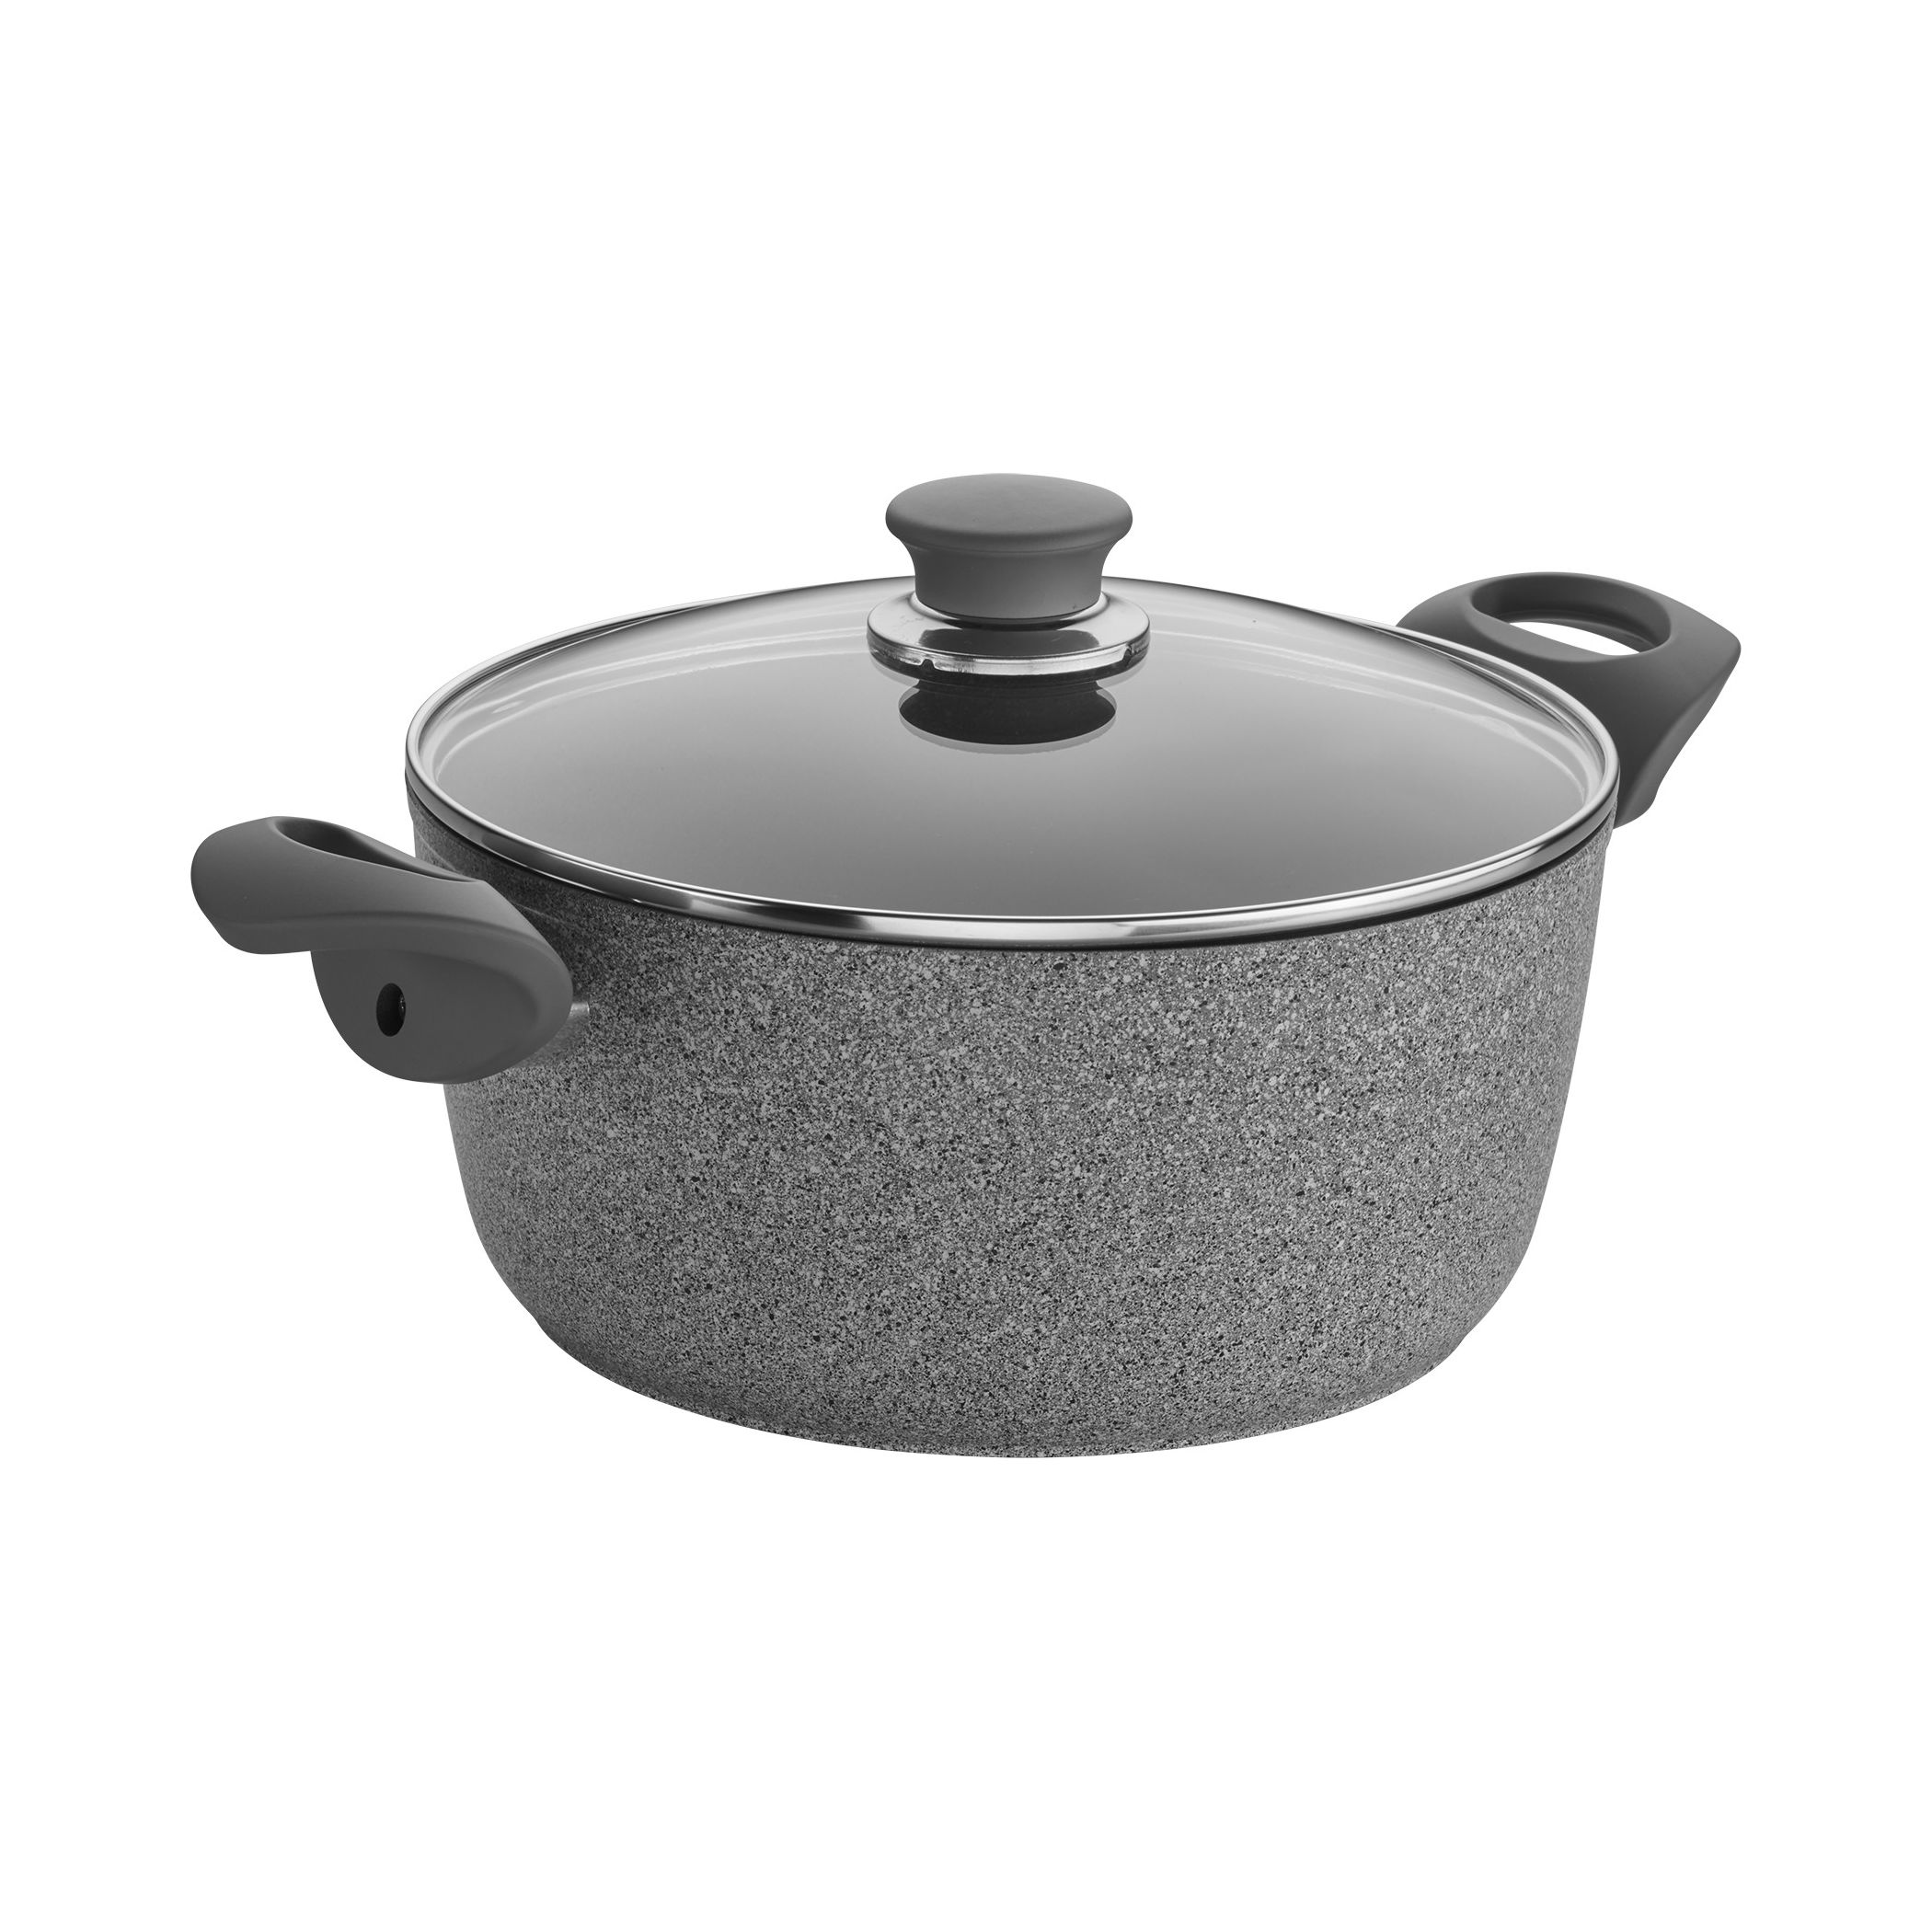  BALLARINI Parma by HENCKELS 4.8-qt Nonstick Dutch Oven with  Lid, Made in Italy, Durable and Easy to clean,Granite: Home & Kitchen